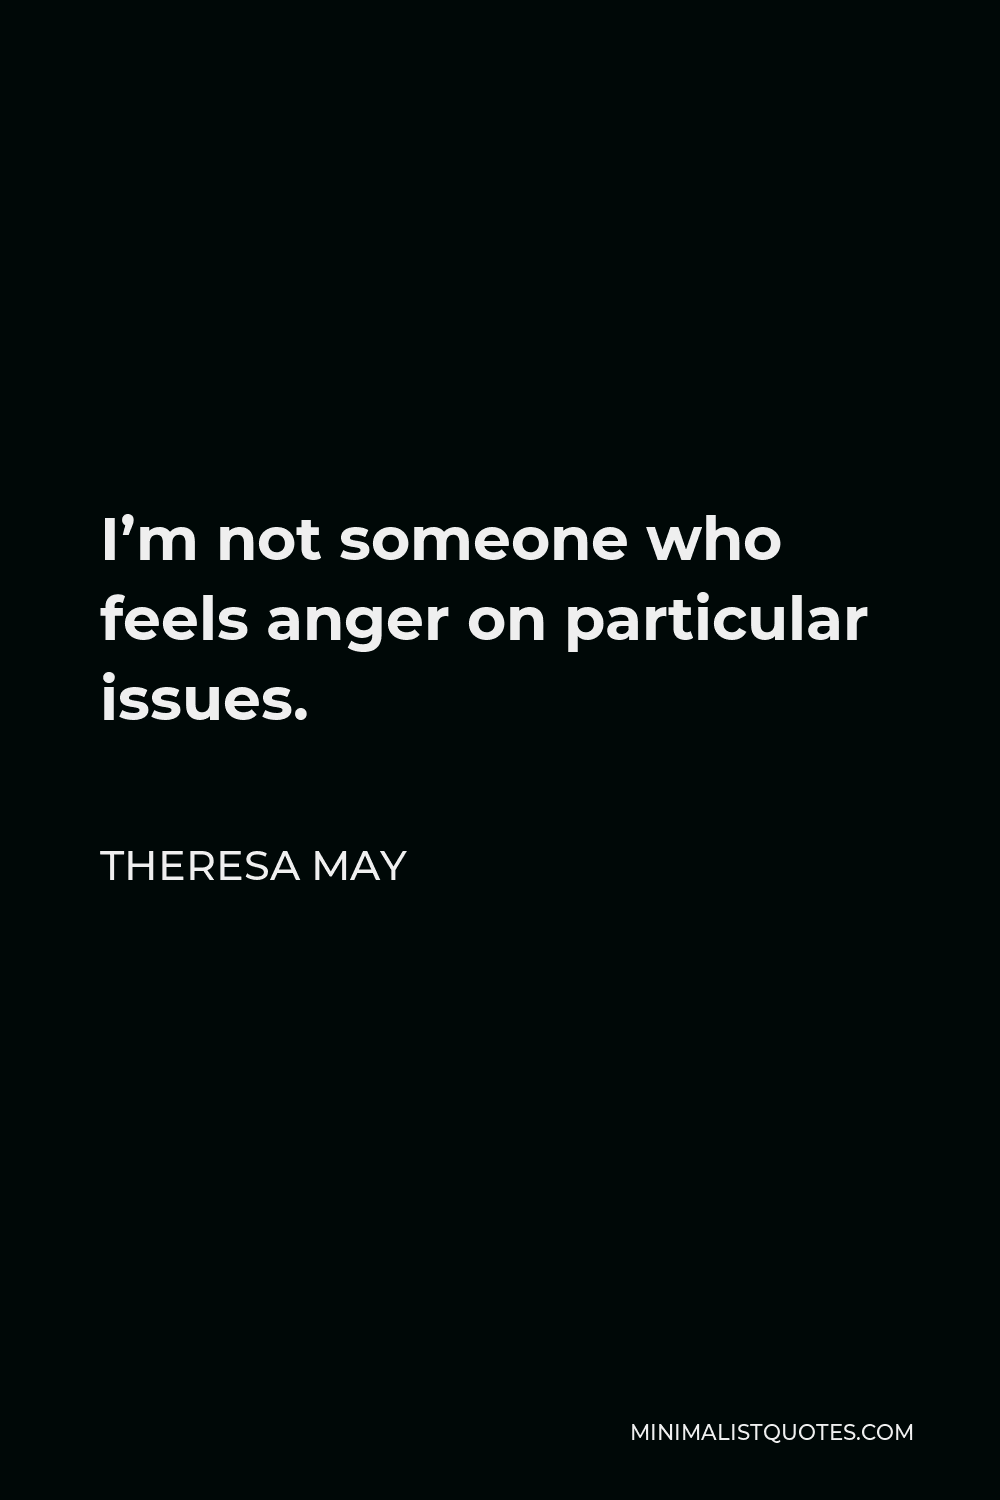 Theresa May Quote - I’m not someone who feels anger on particular issues.